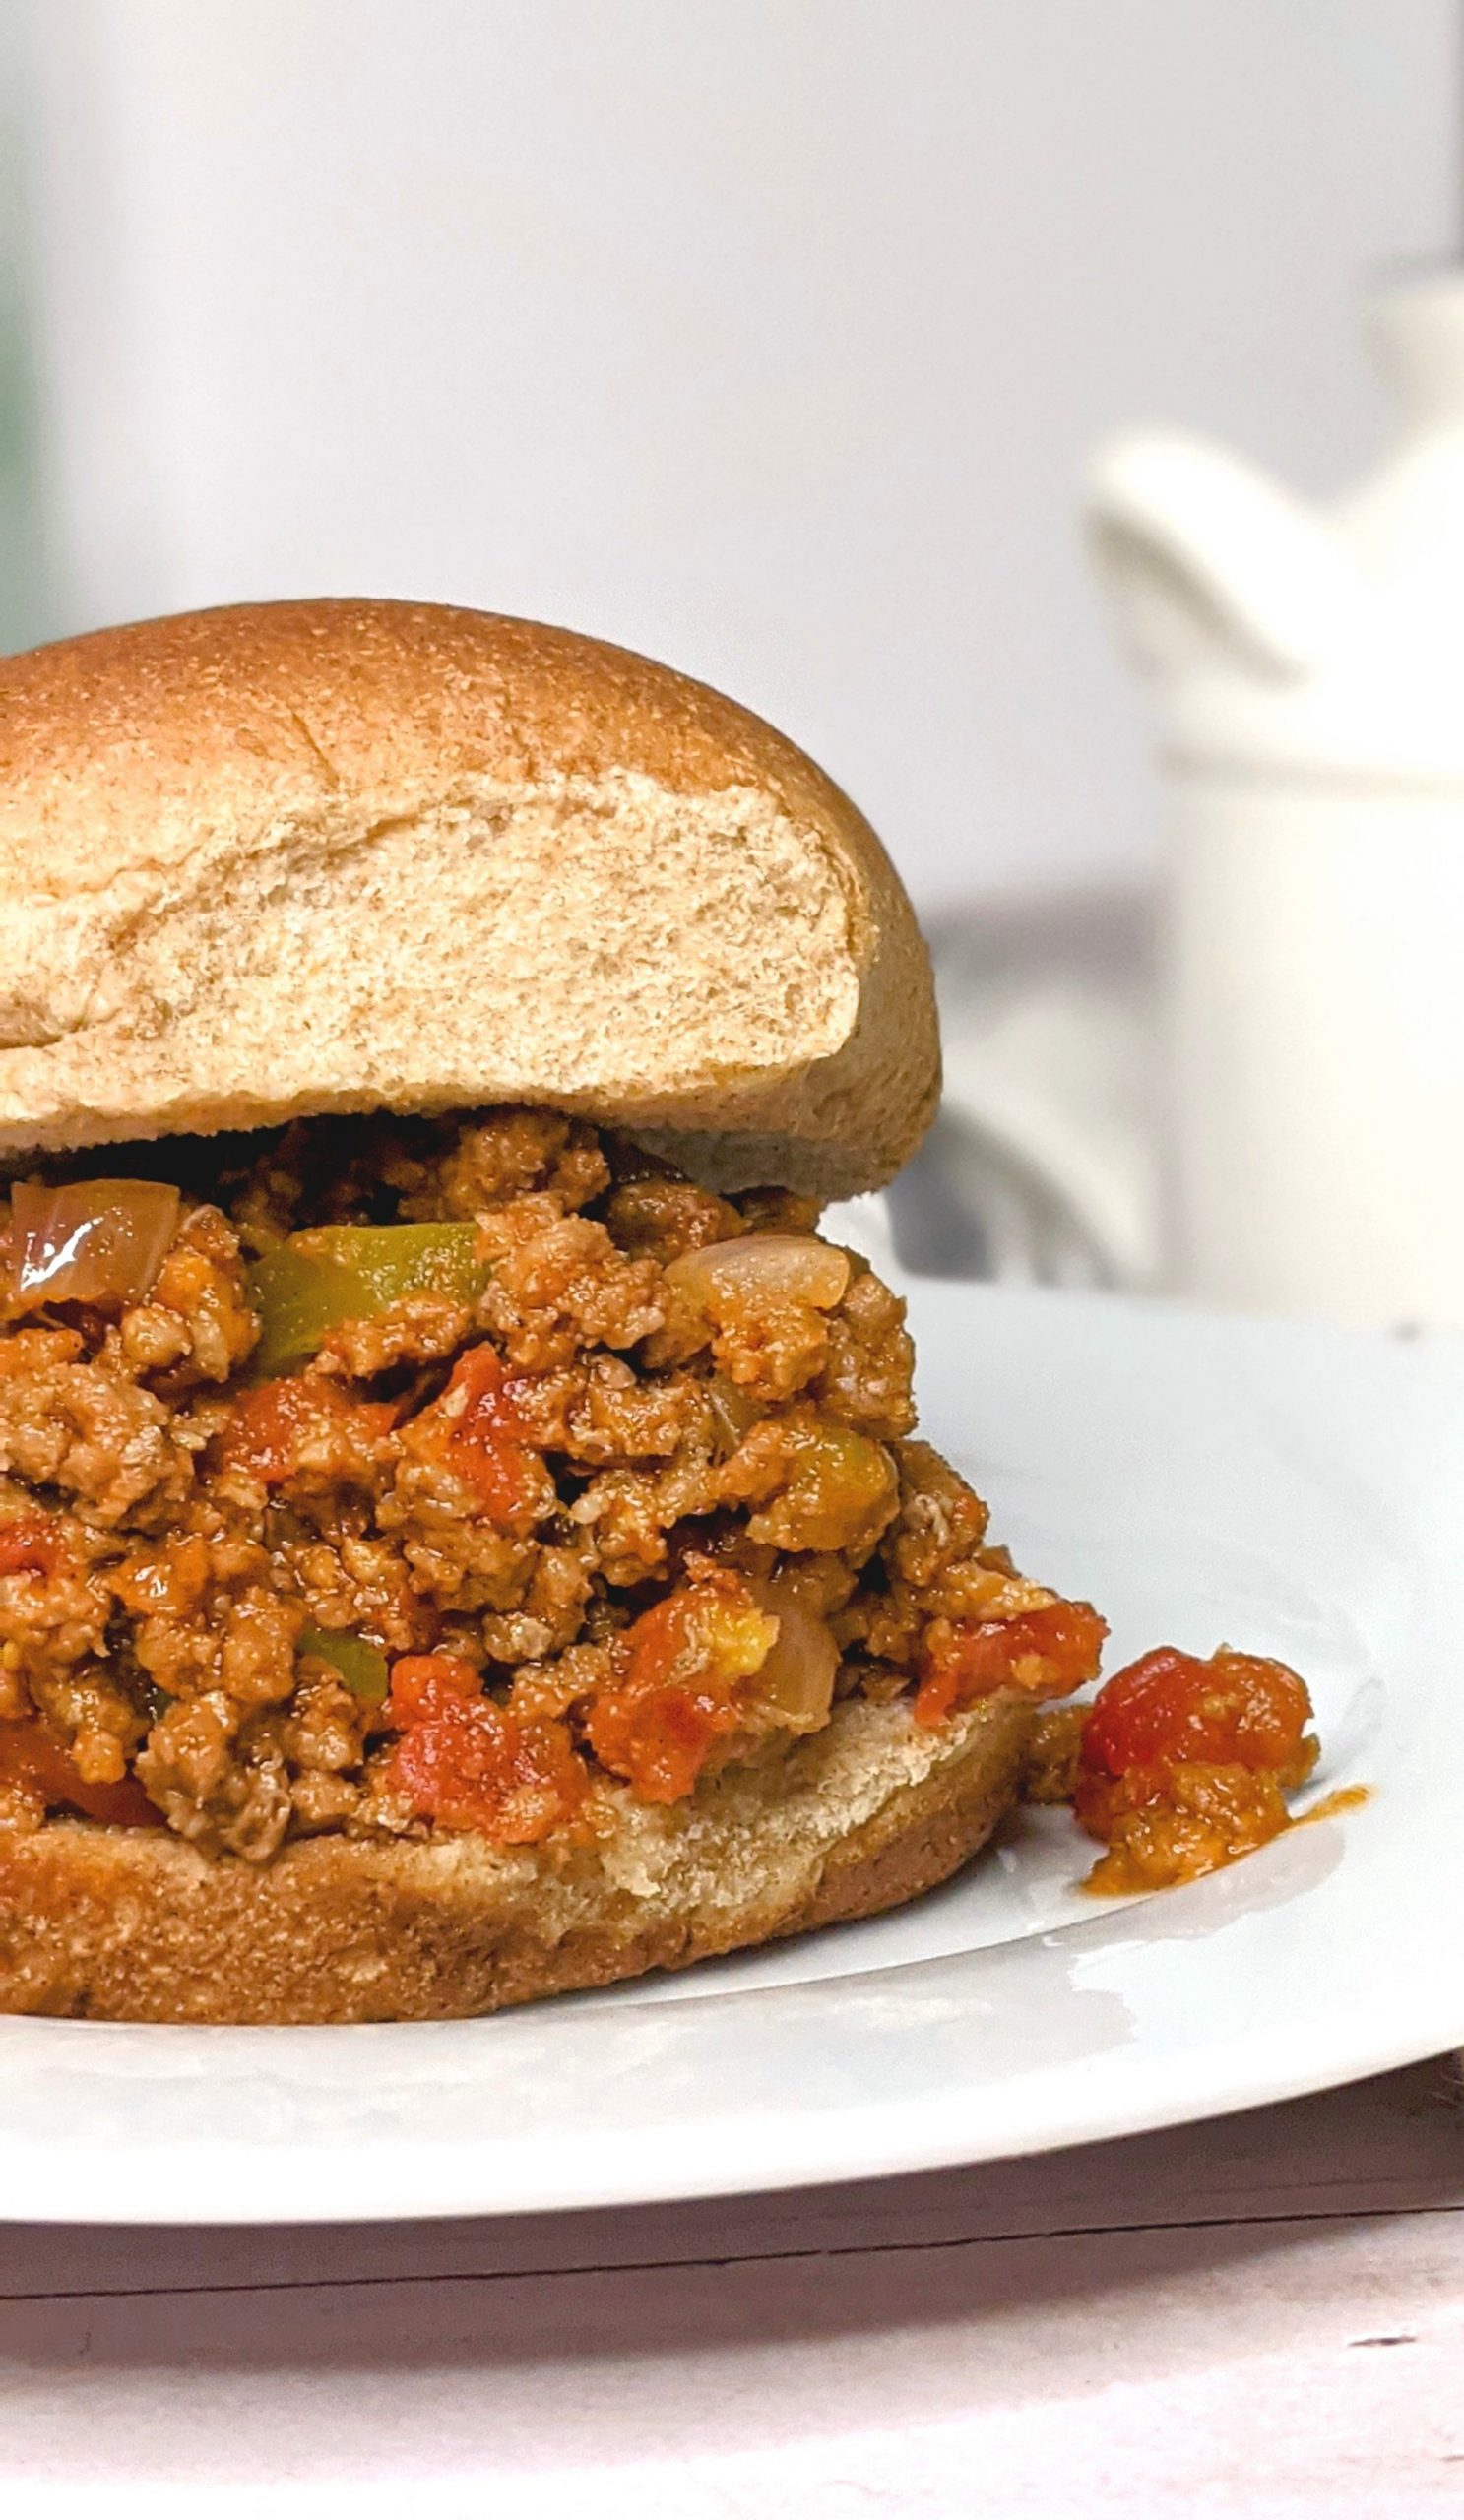 low sodium sloppy joes without canned sauce homemade healthy sloppy joe recipes for families healthy dinners for kids without salt low sodium dinner recipes